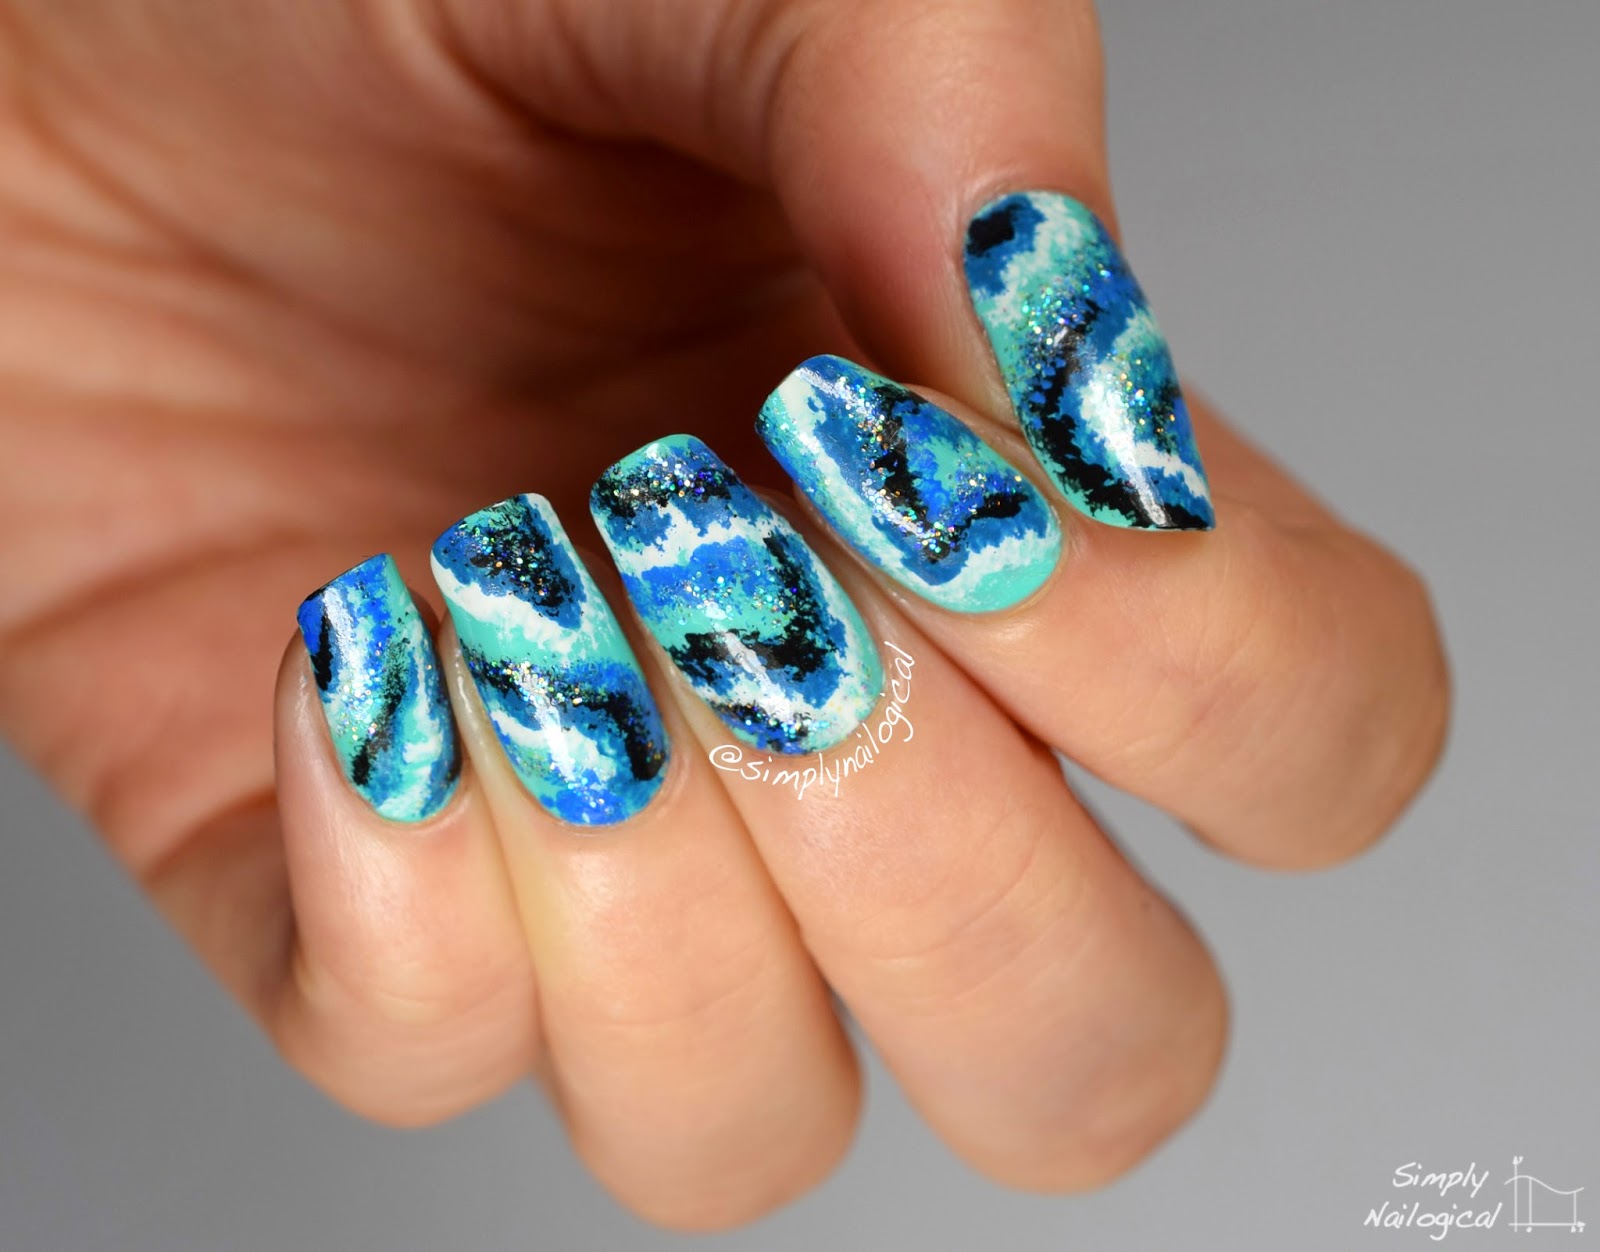 Simply Nailogical: Nail art hack: How to get clean, smooth lines with your  paintbrush